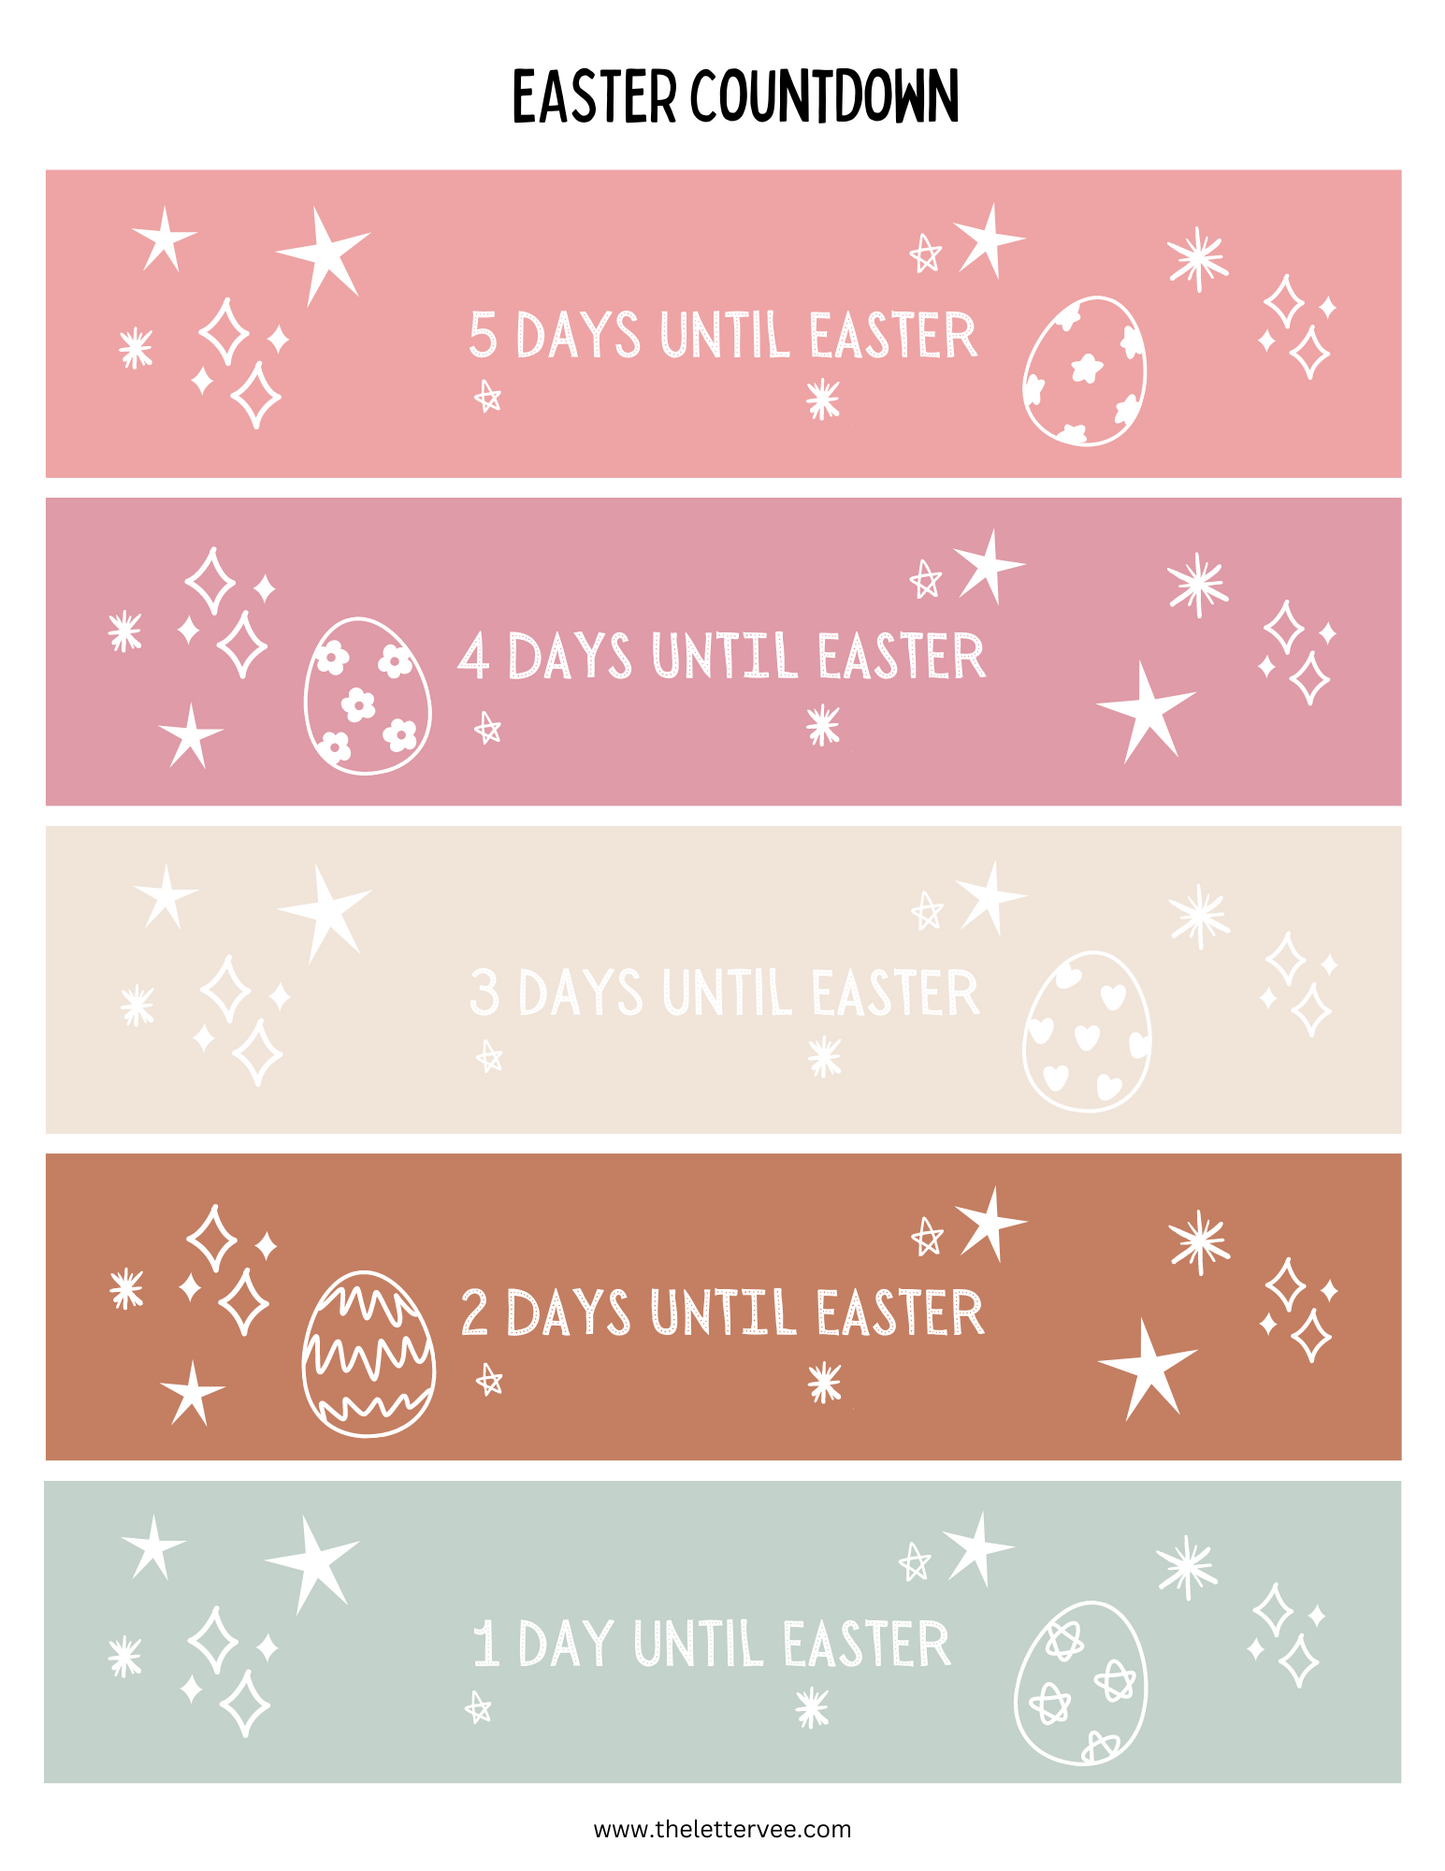 Paper Chain Countdown | Easter